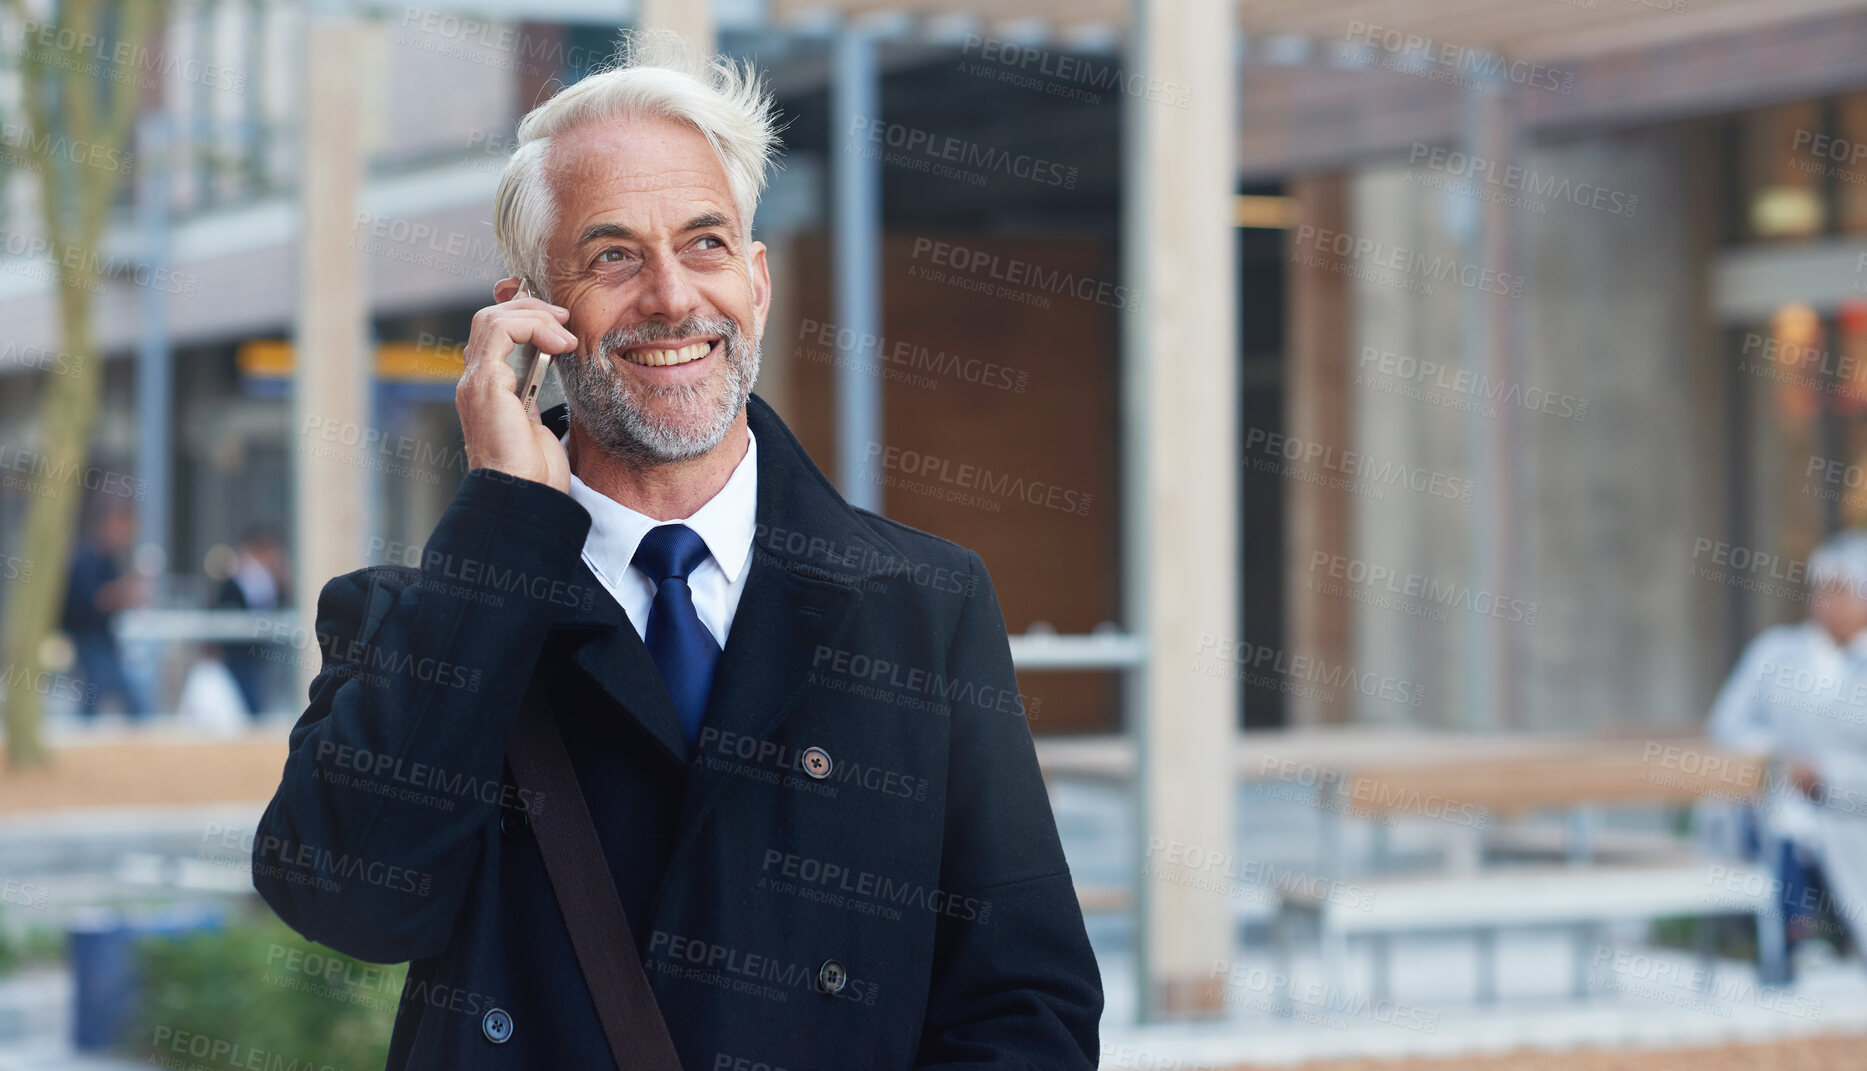 Buy stock photo City, phone call and smile, mature man or lawyer outside law firm, successful discussion on legal advice. Ceo, boss or businessman on sidewalk at court with 5g smartphone, crm or conversation.